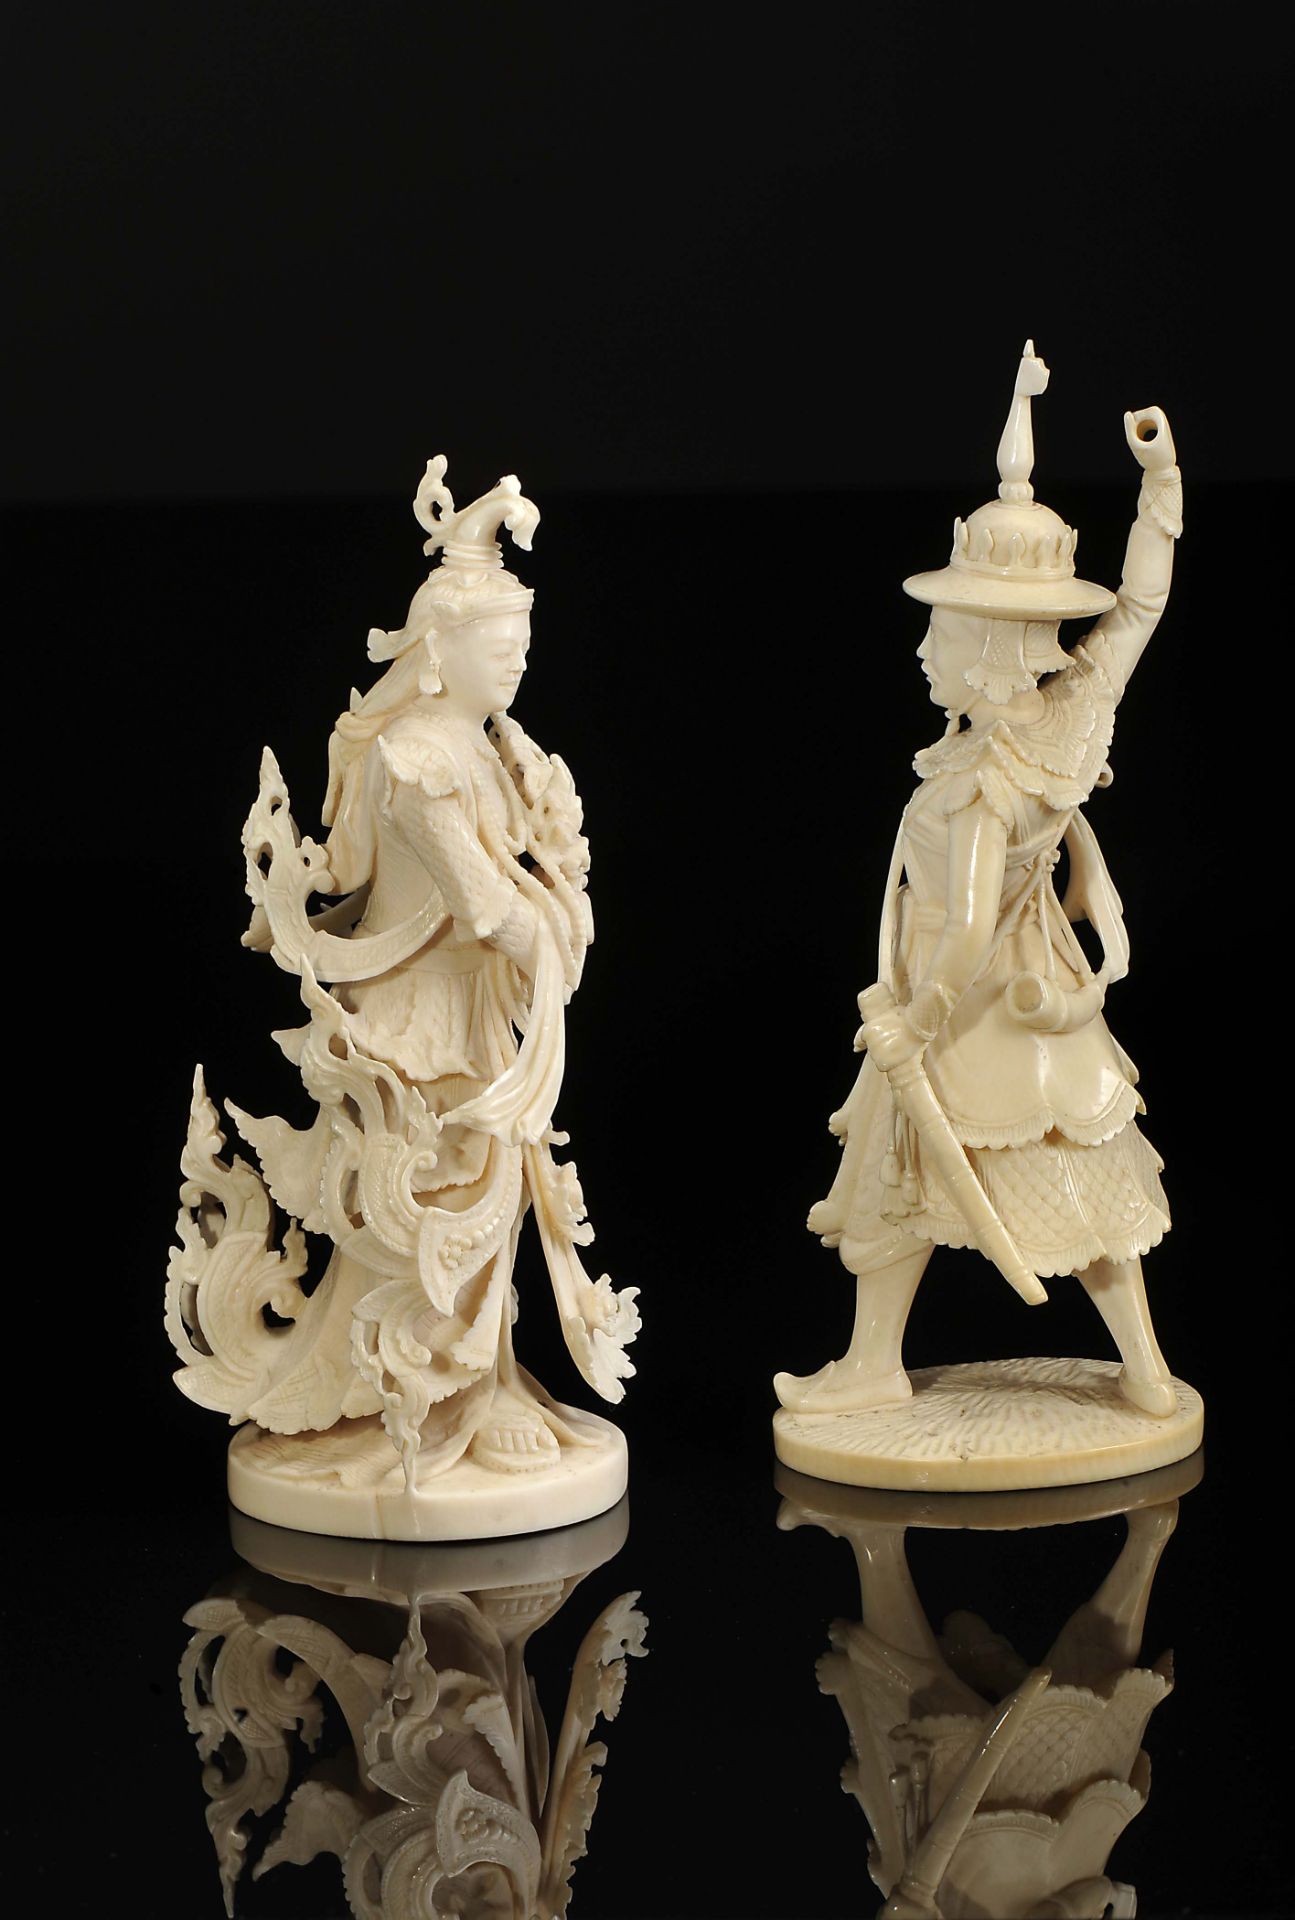 Chess pieces, "King" and "Queen" - Image 2 of 3